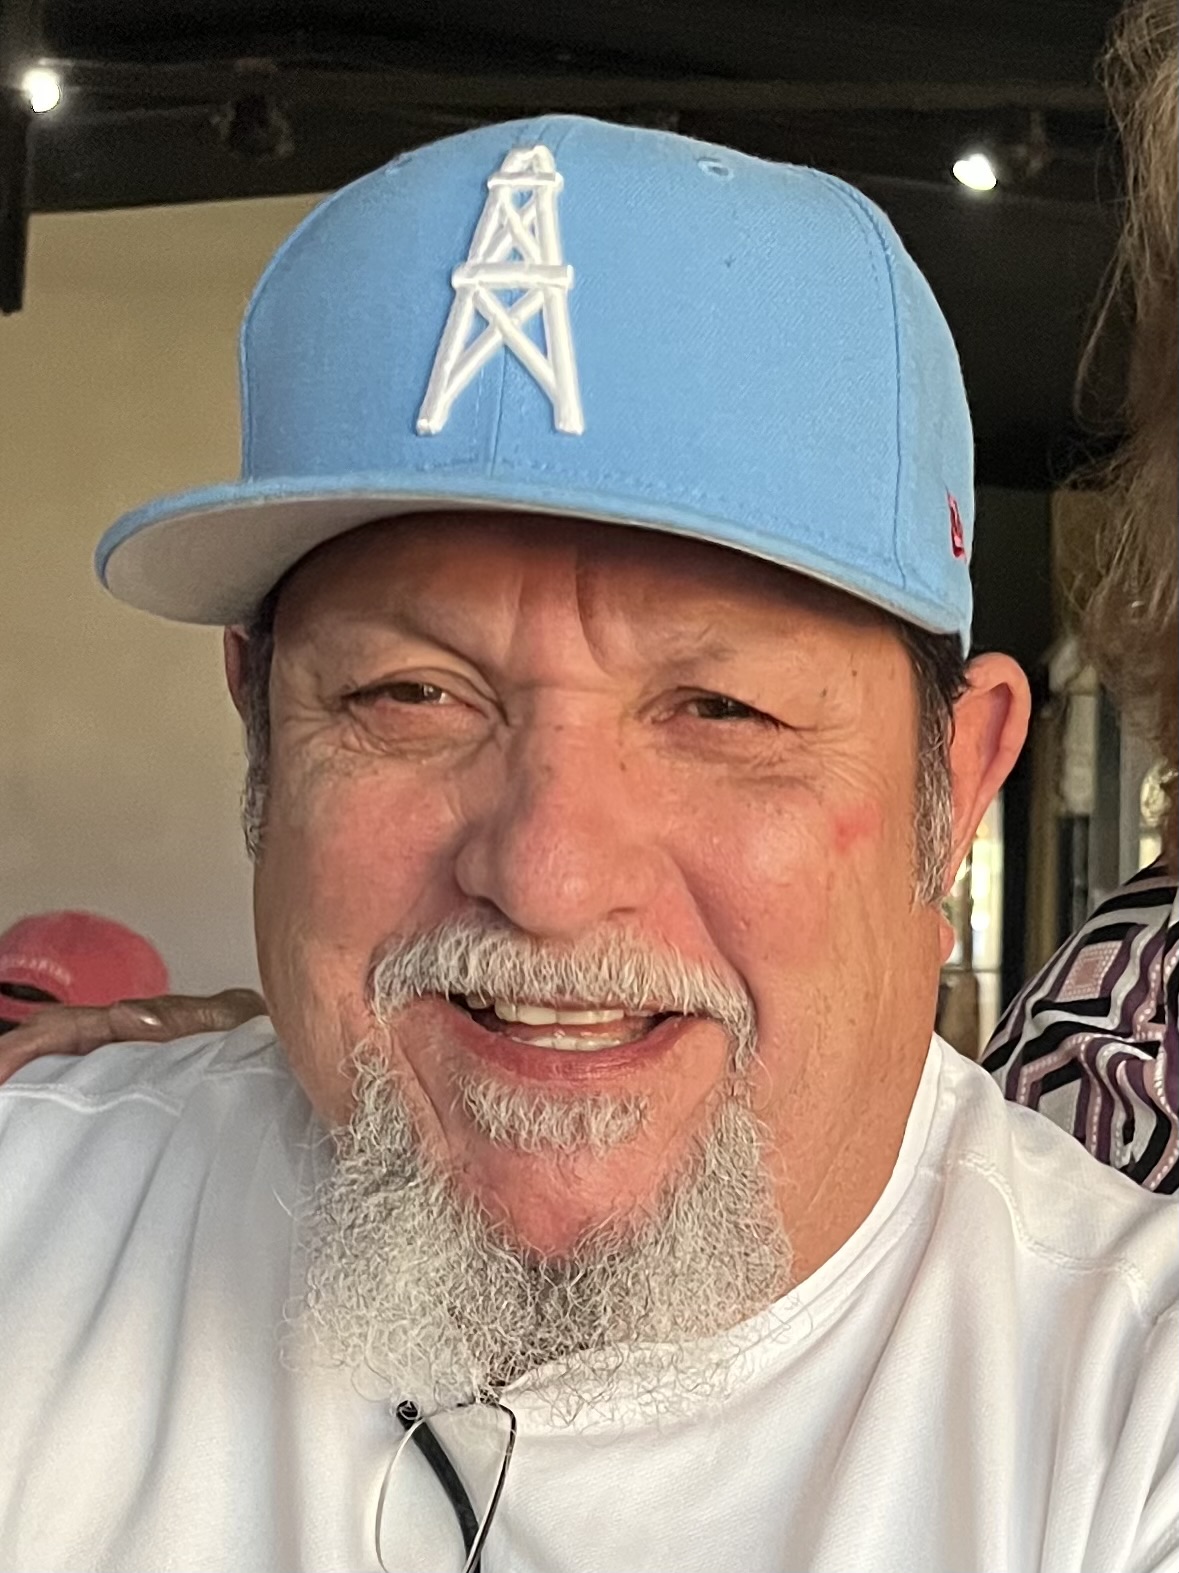 A man with a beard and hat smiles for the camera